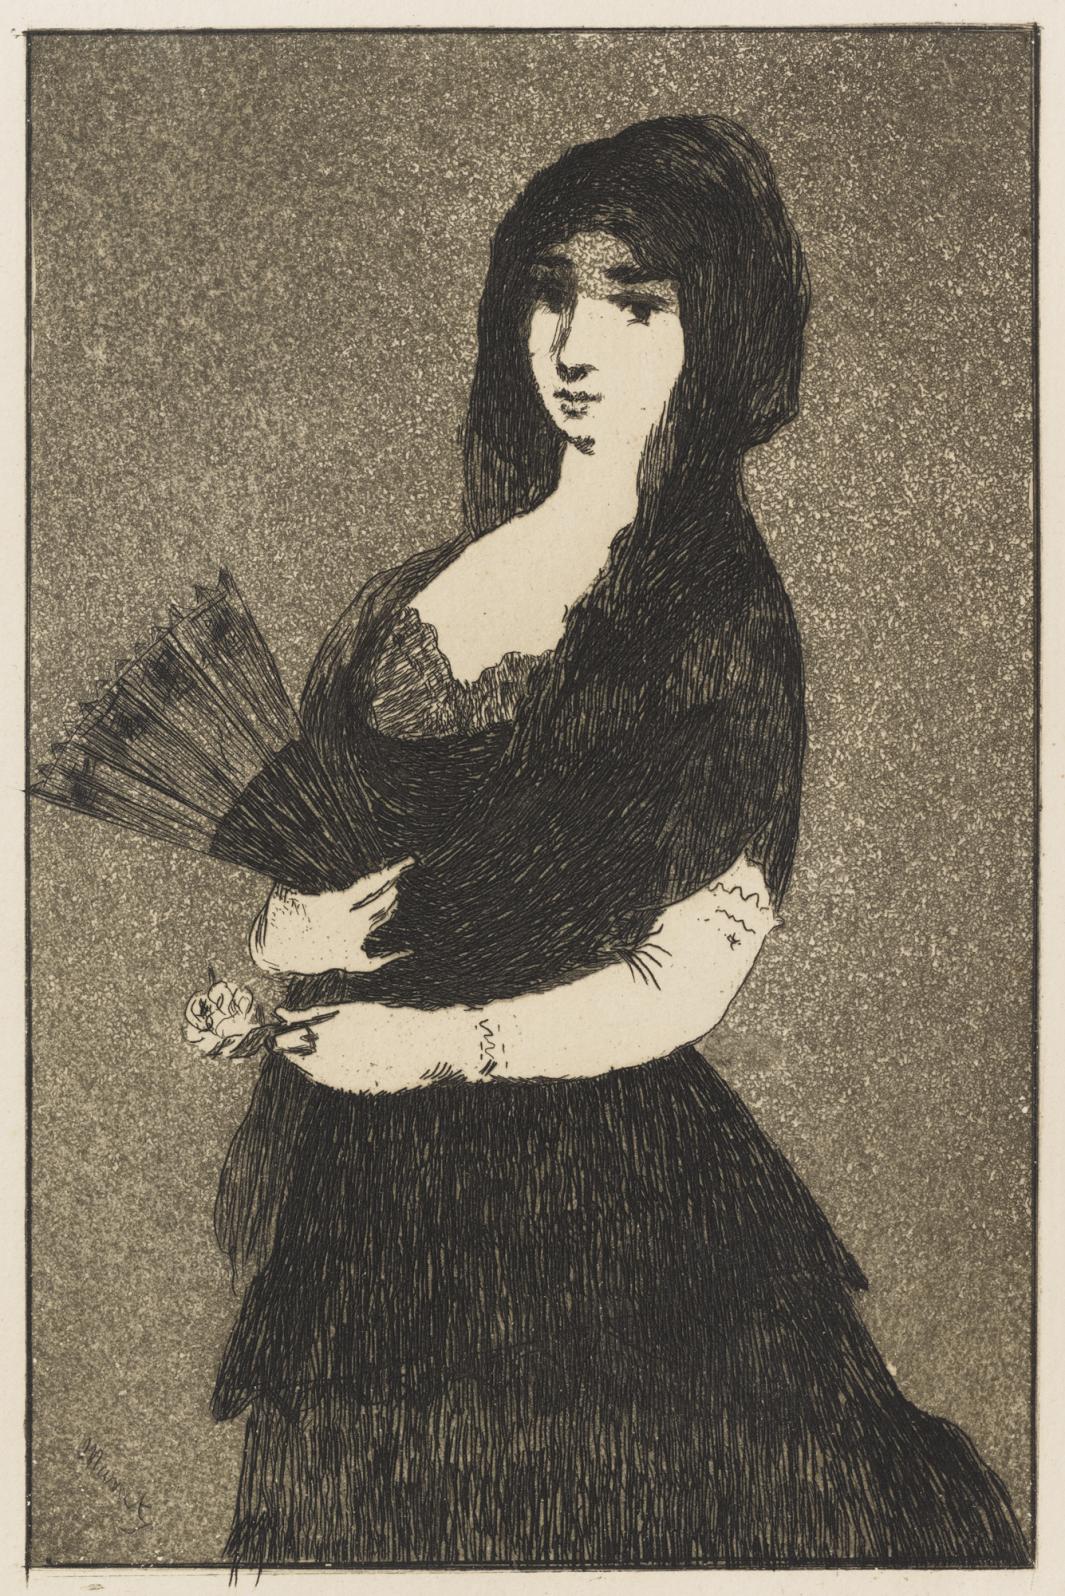 Print of woman dressed in black, wearing a mantilla and holding a fan